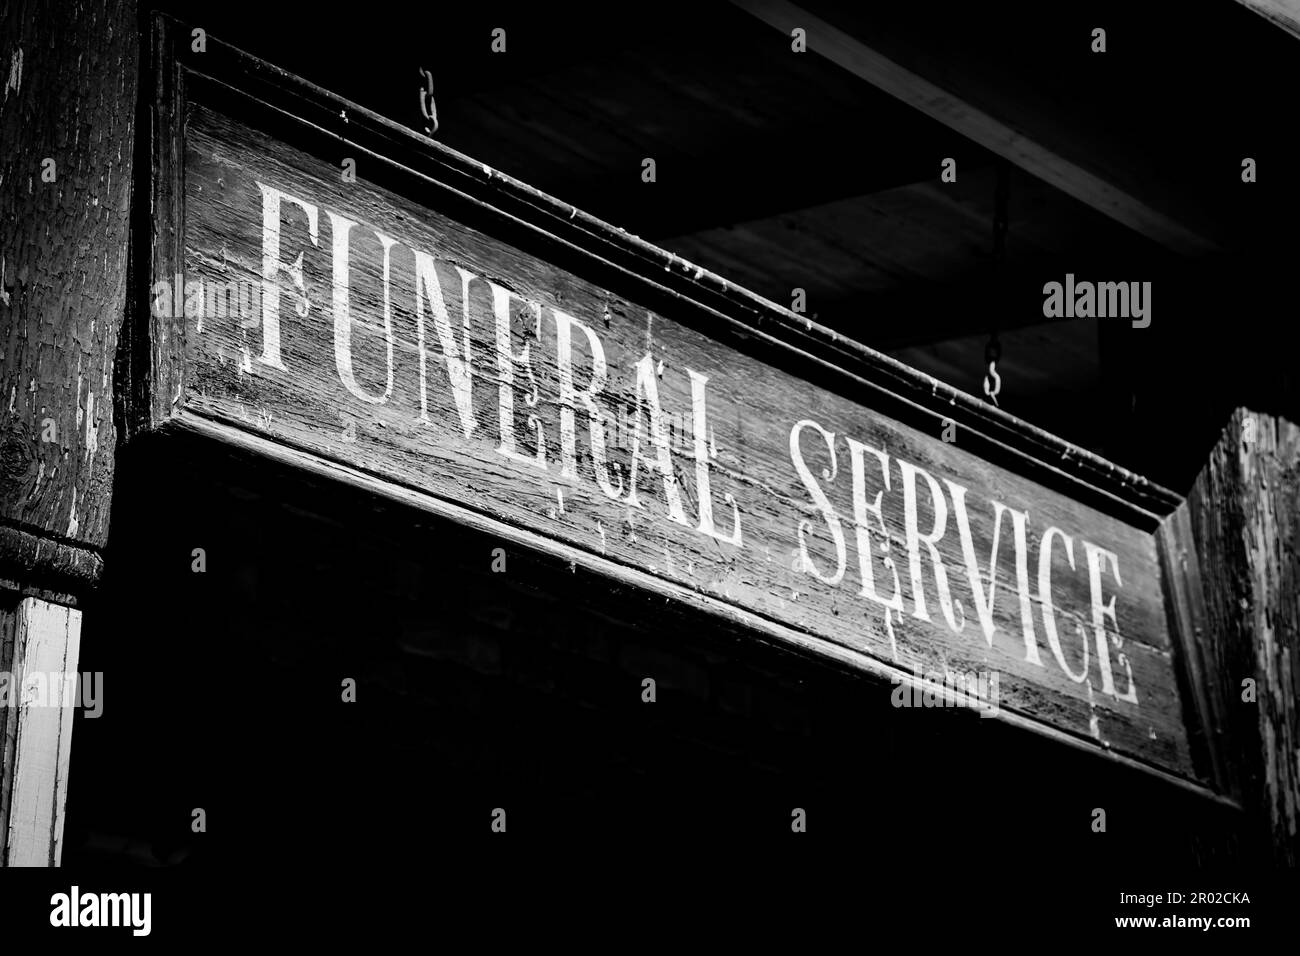 Vintage Funeral Service cartel made of wood. Good for concepts Stock Photo